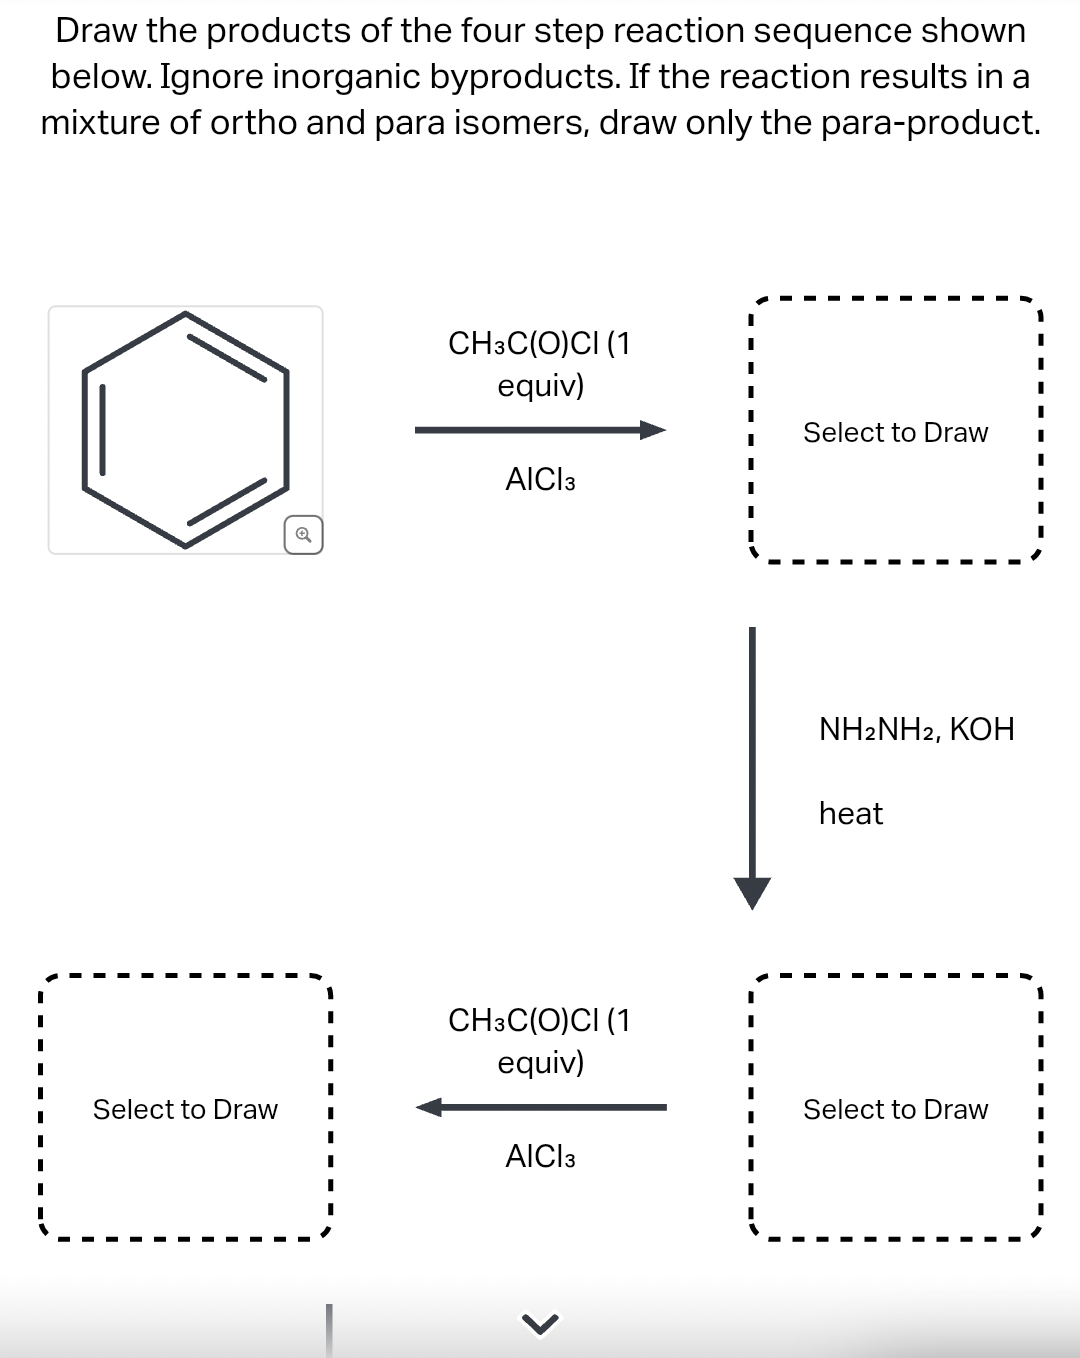 Draw the products of the four step reaction sequence shown
below. Ignore inorganic byproducts. If the reaction results in a
mixture of ortho and para isomers, draw only the para-product.
Select to Draw
Q
CH3C(O)CI (1
equiv)
AICI 3
CH3C(O)CI (1
equiv)
AICI 3
I
I
I
Select to Draw
NH2NH2, KOH
heat
Select to Draw
I
I